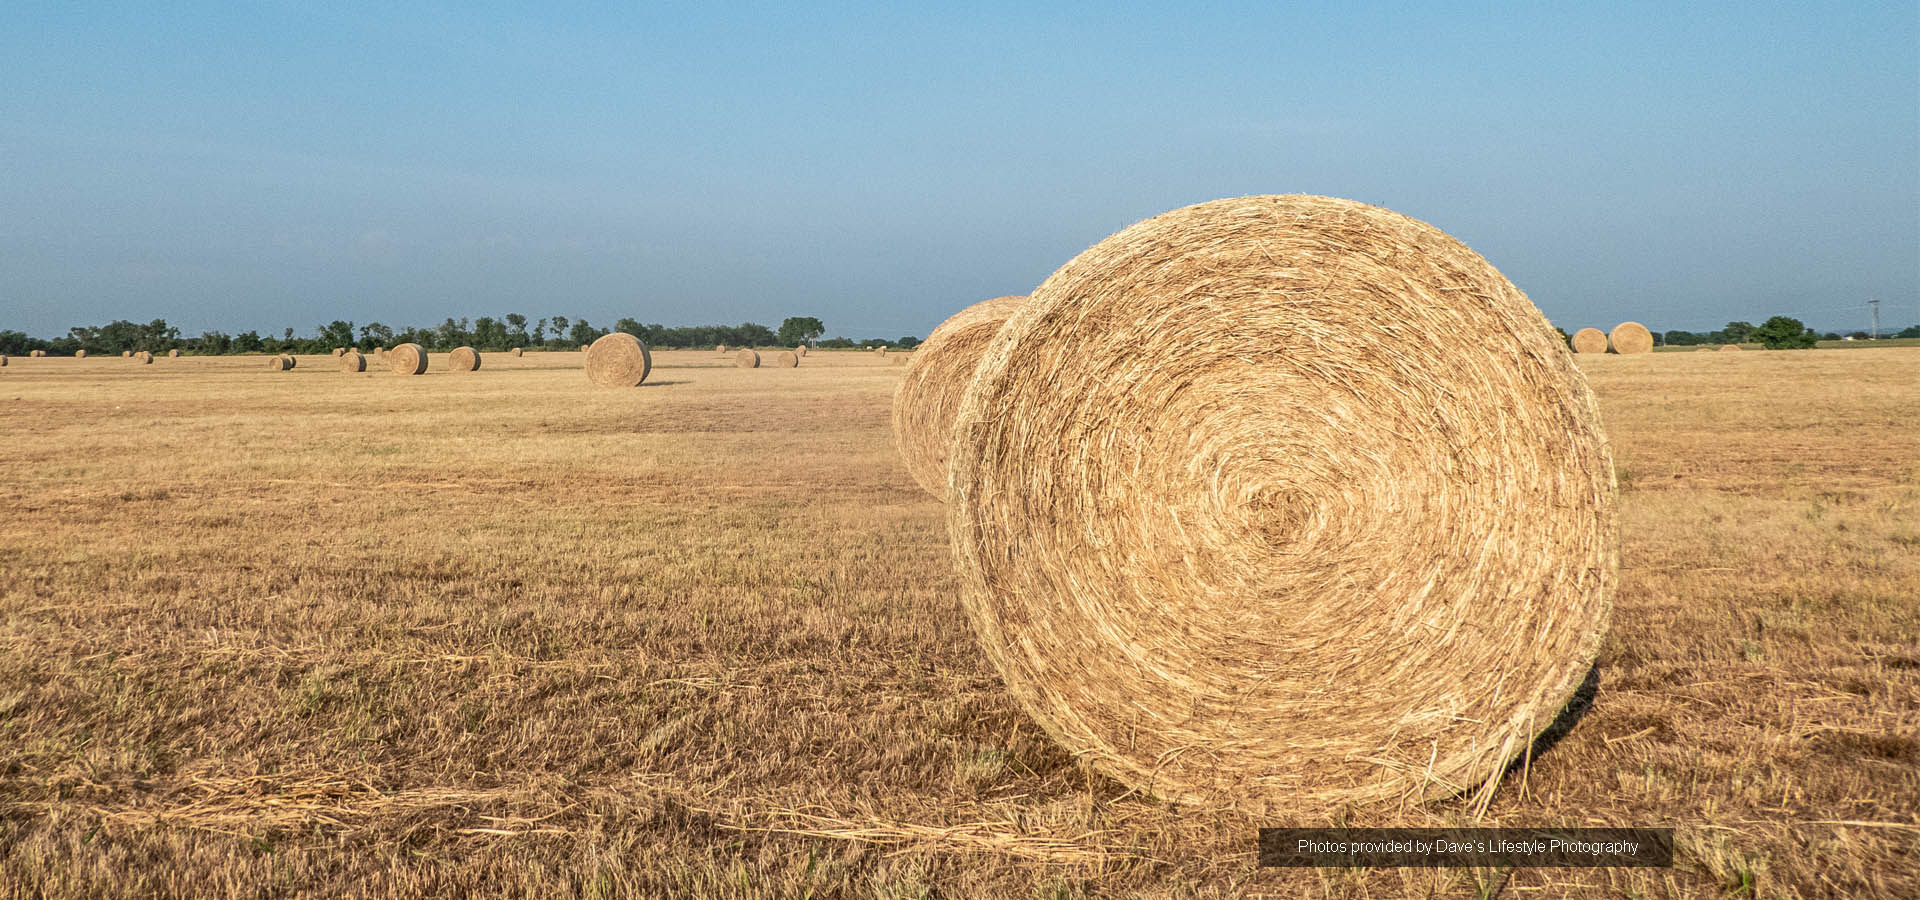 Rolled Hay Image by Dave’s Lifestyle Photography